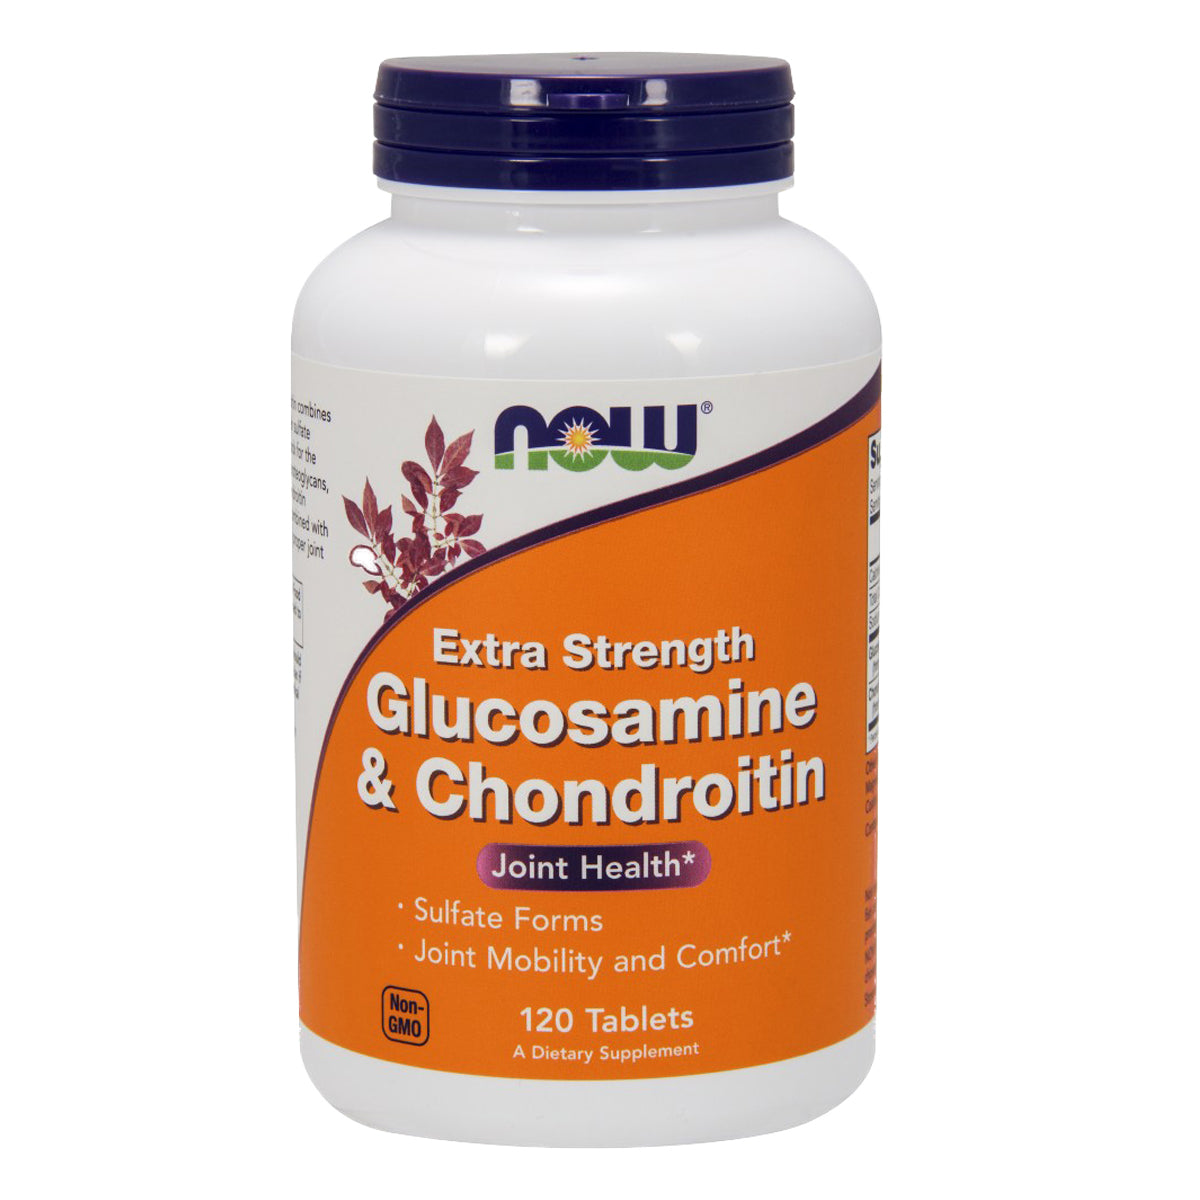 Primary image of Glucosamine + Chondroitin Double Strength